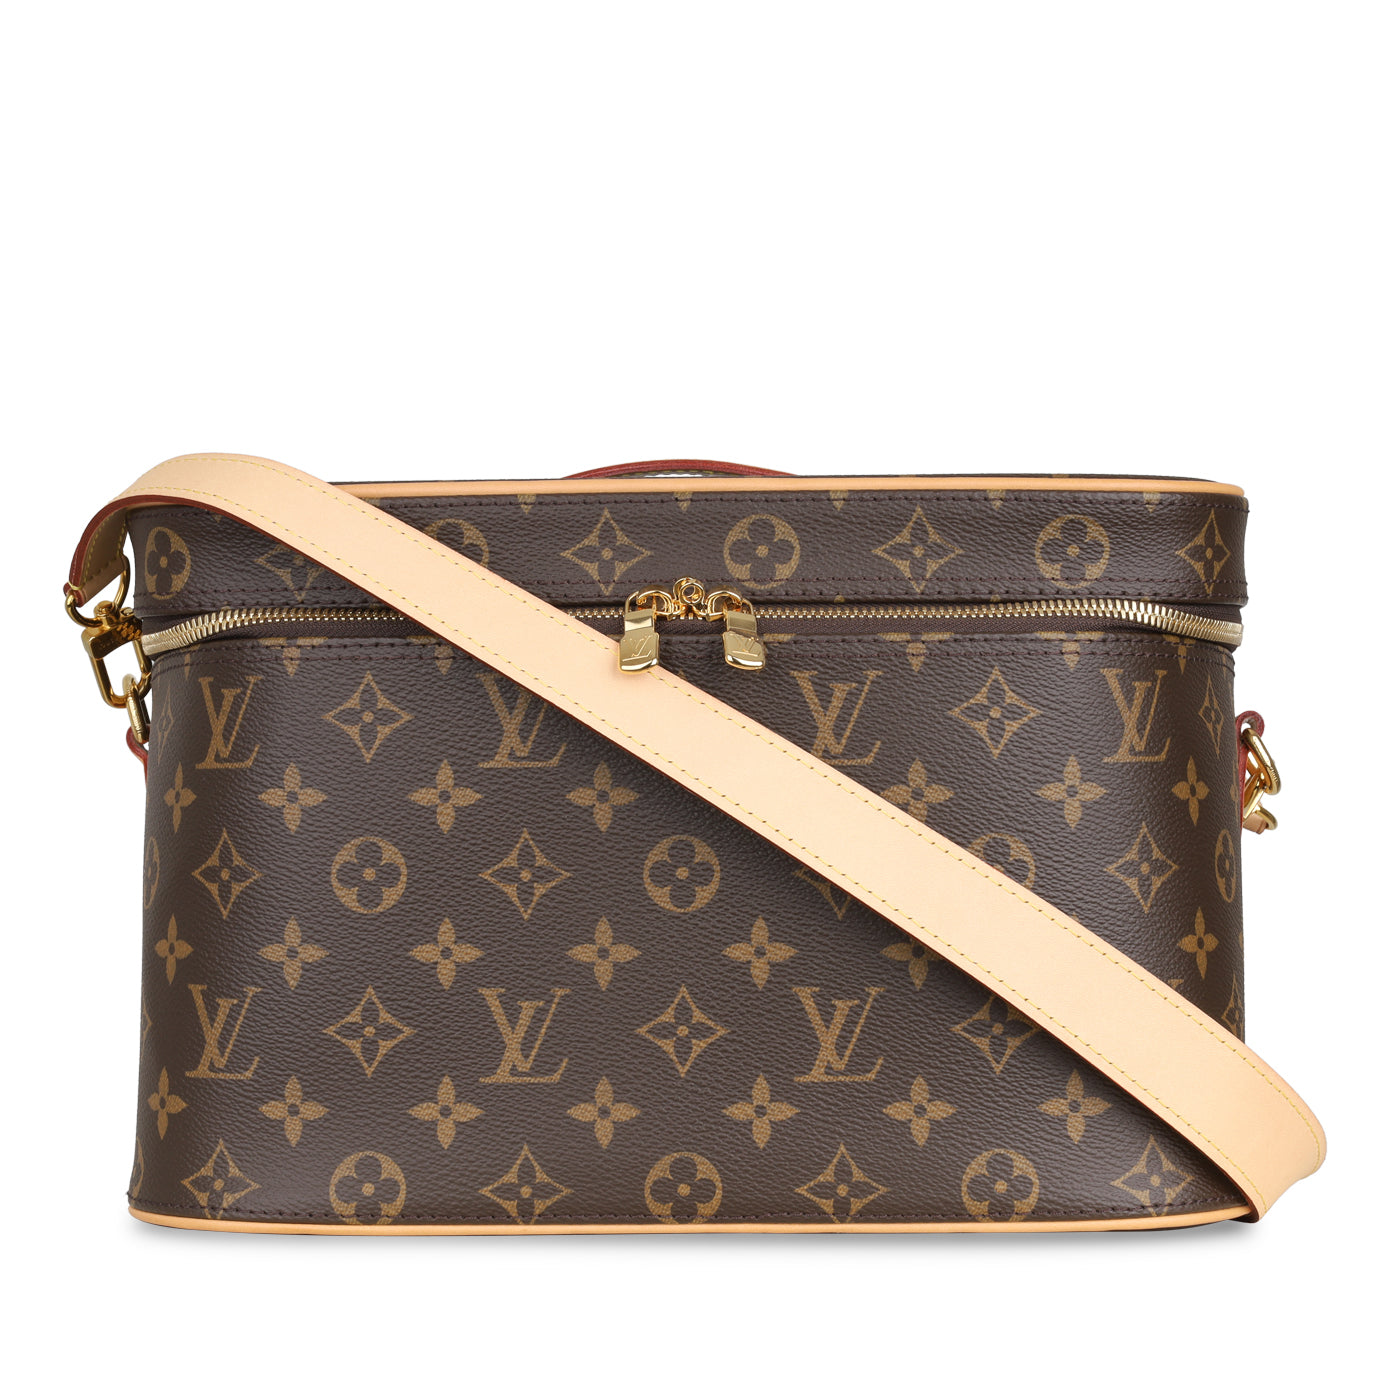 Louis Vuitton Nice and Vanity Price List and Comparison - Brands